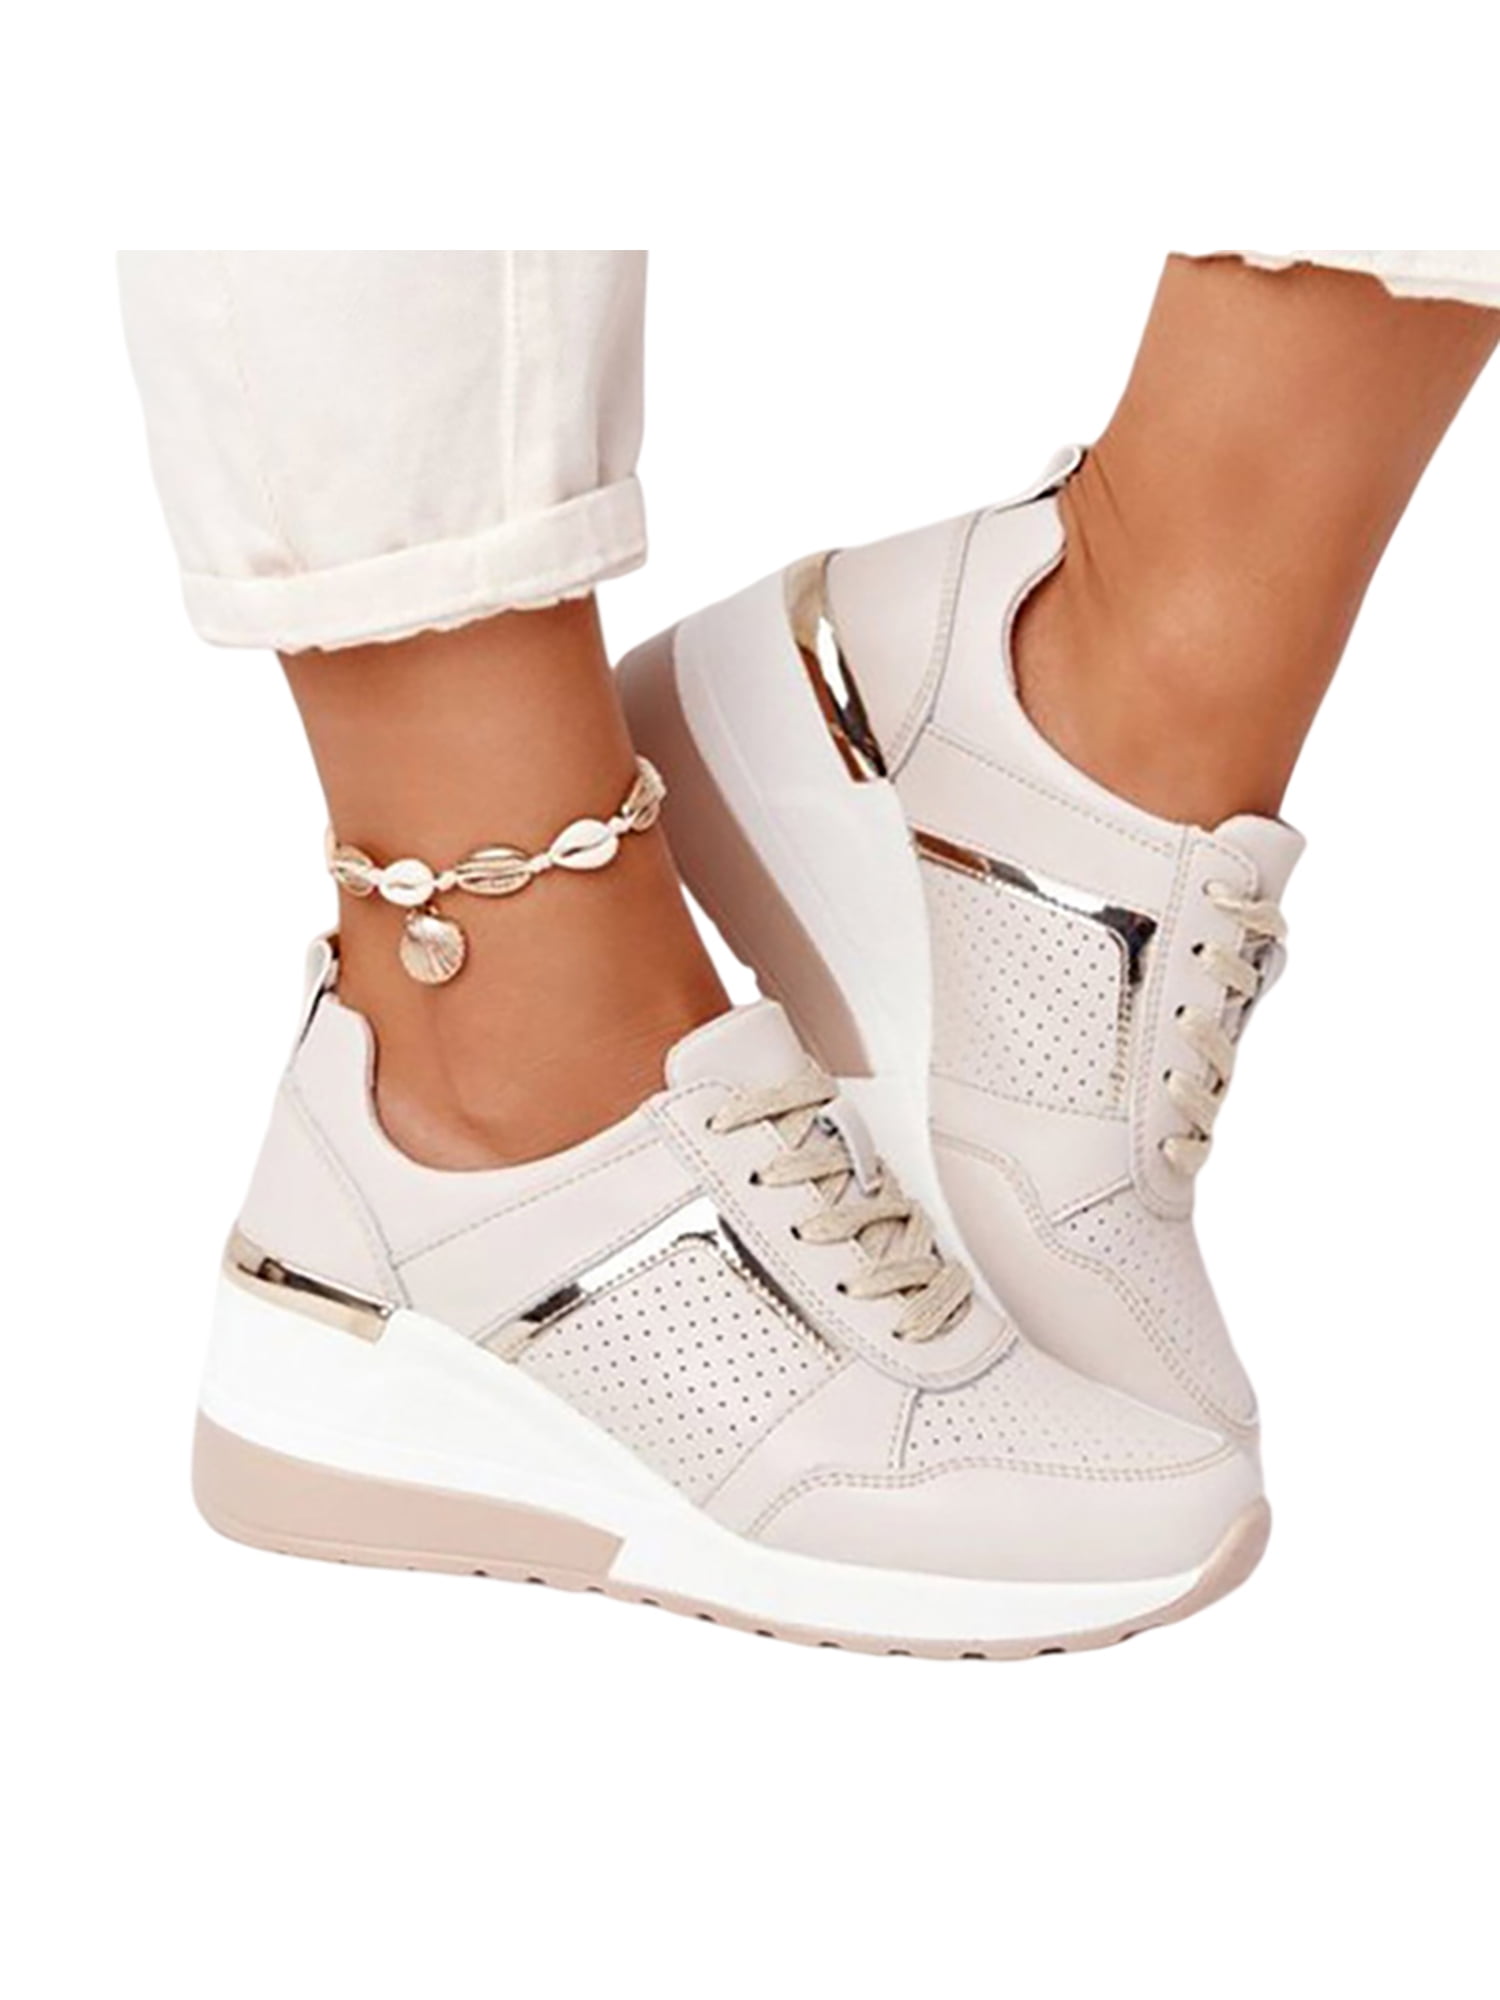 Women's Platform Wedge Athletic Lace Up Casual Sneakers Round Toe Trainers Shoes 